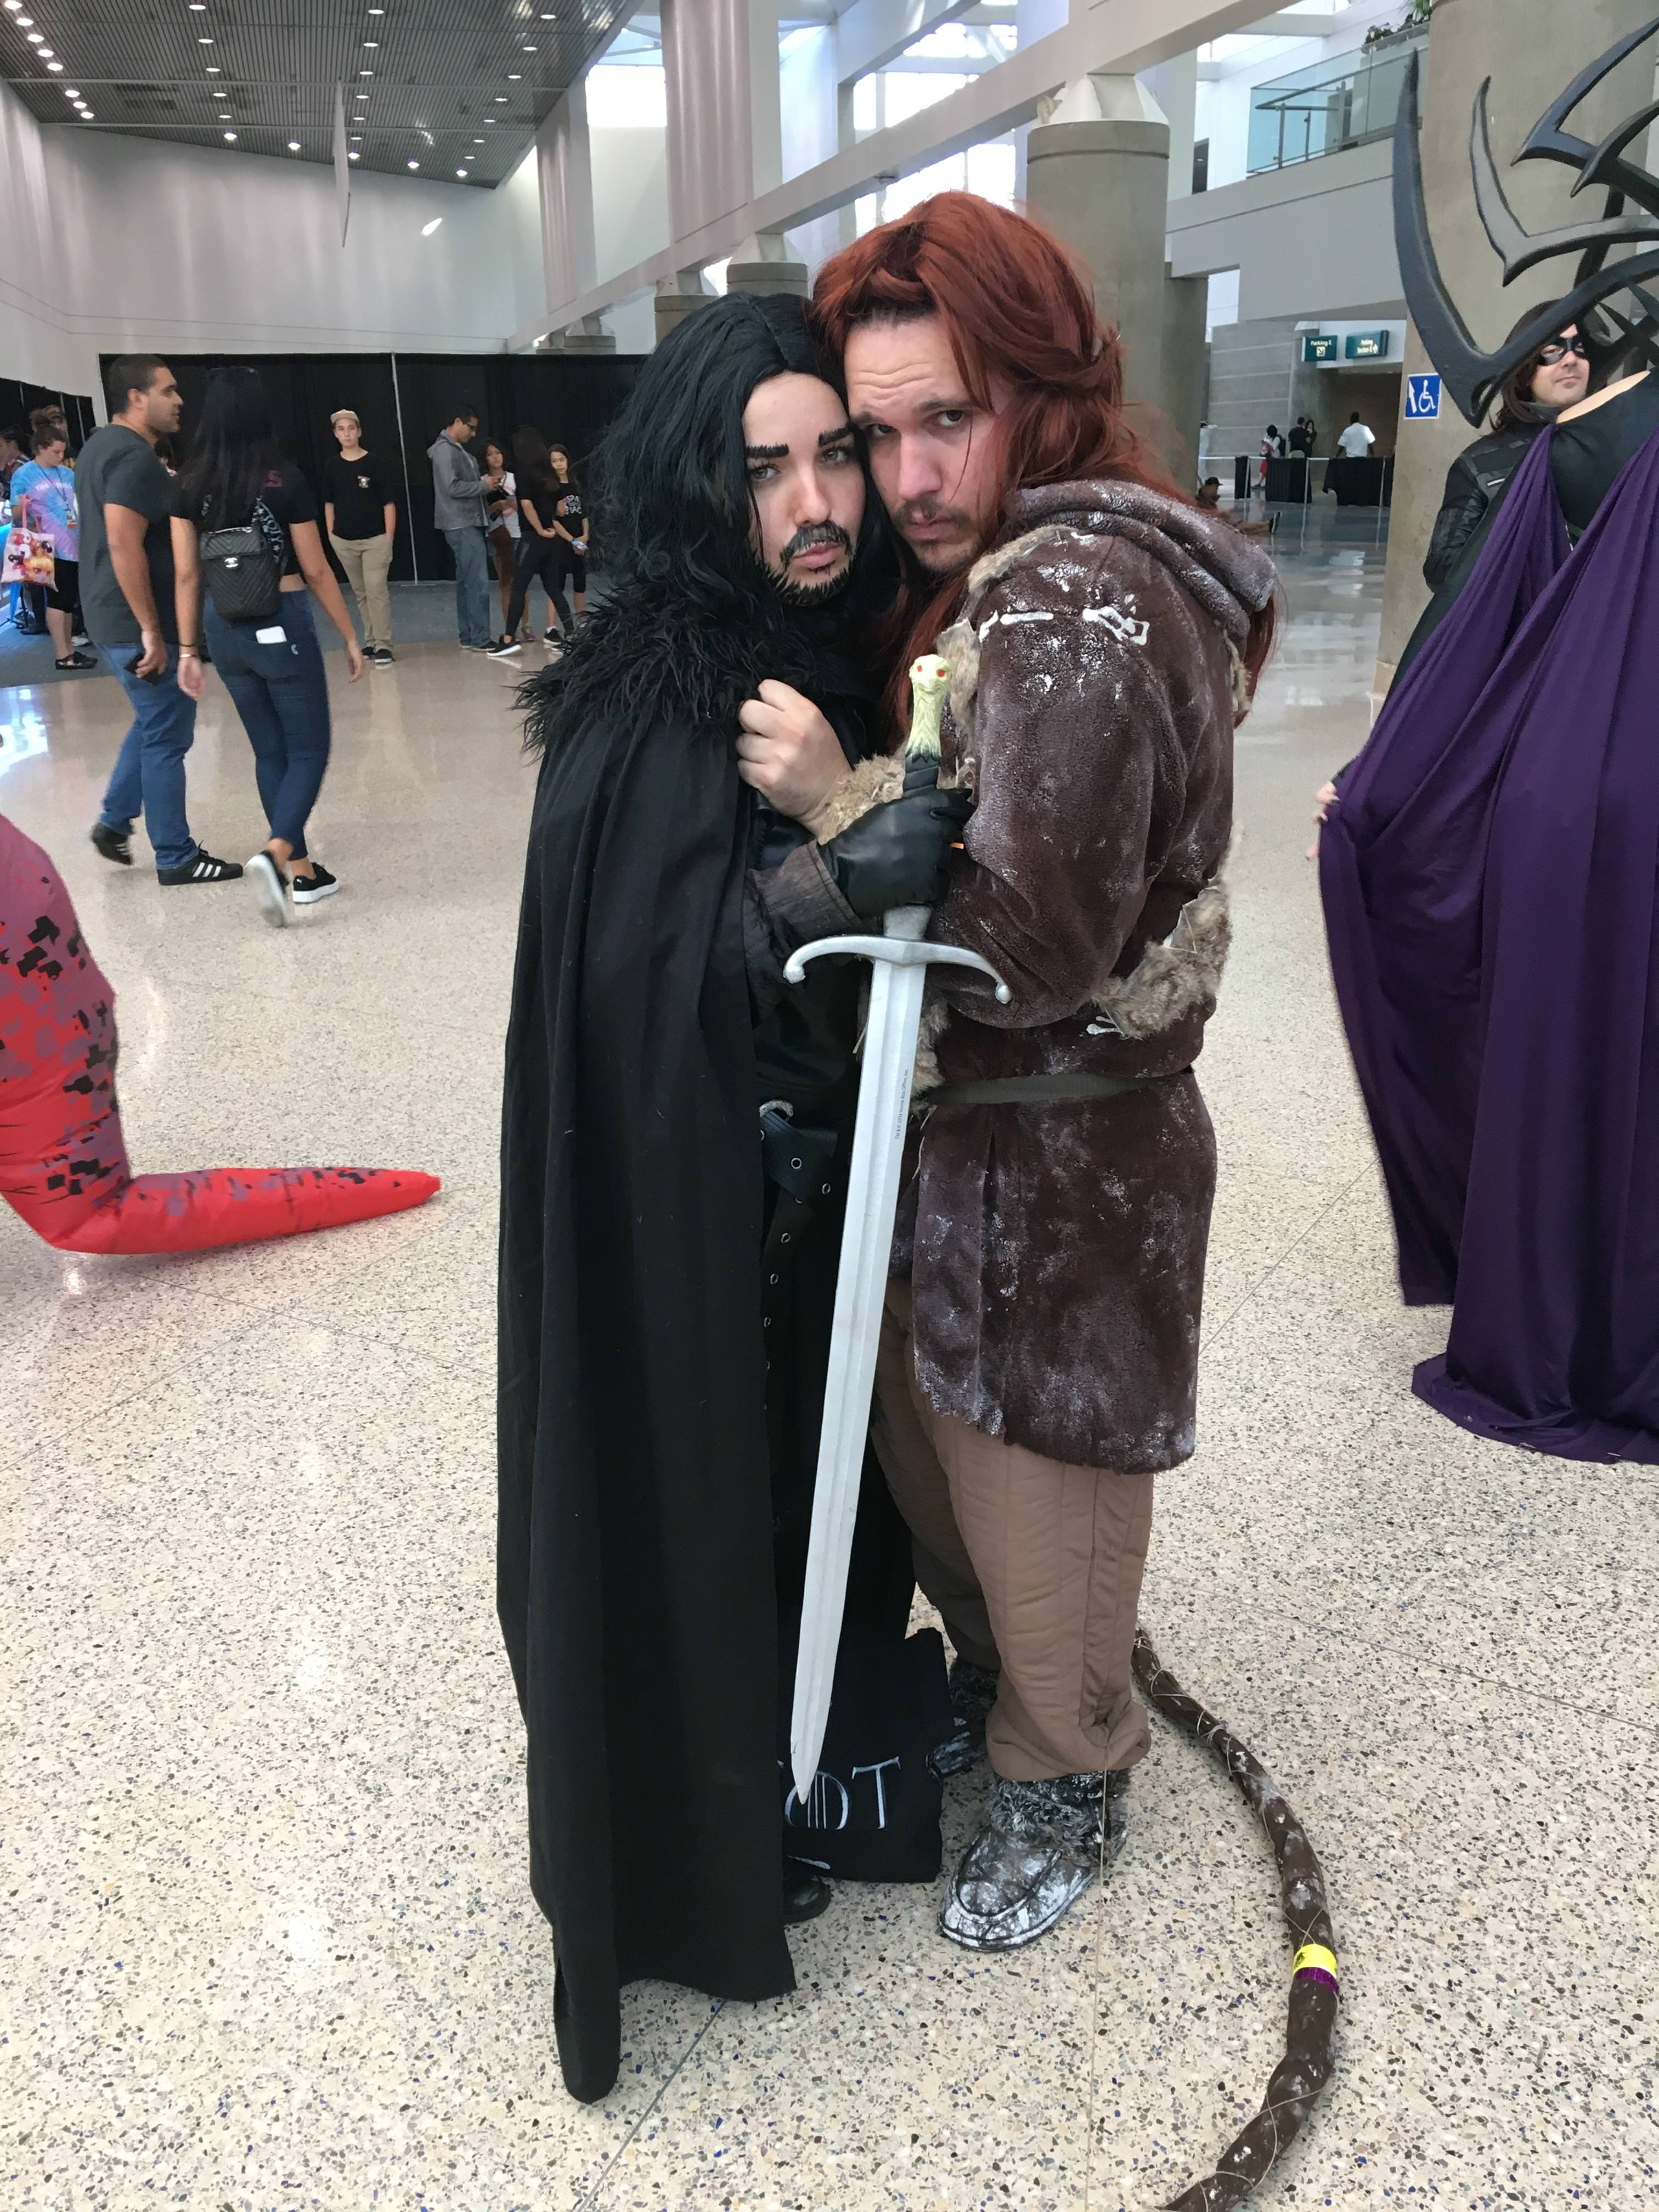 24 Awesome Photos From L.A. Comic Con 2017